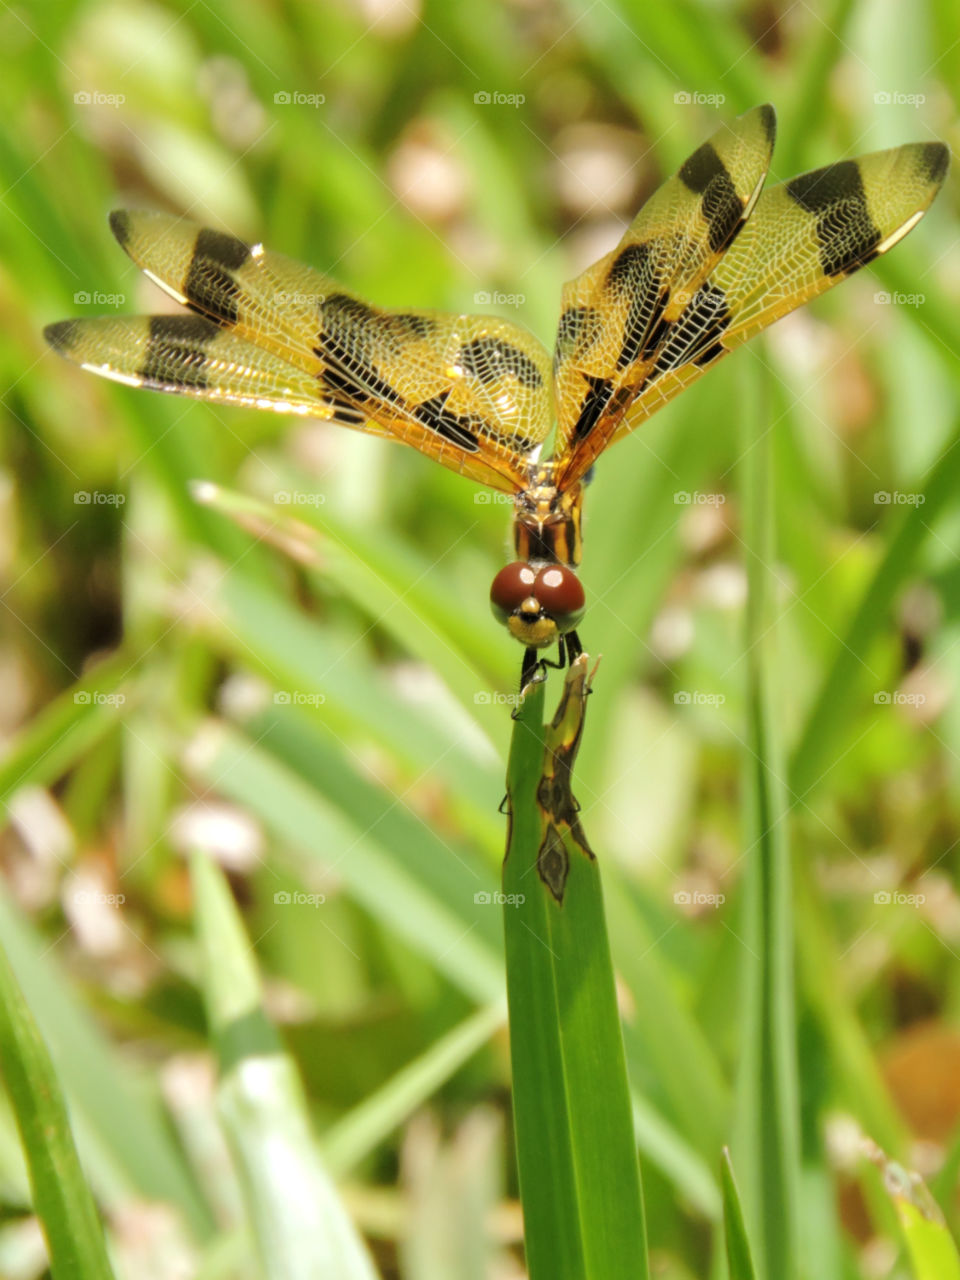 Posing. Halloween Pennant Dragonfly posing on a blade of grass